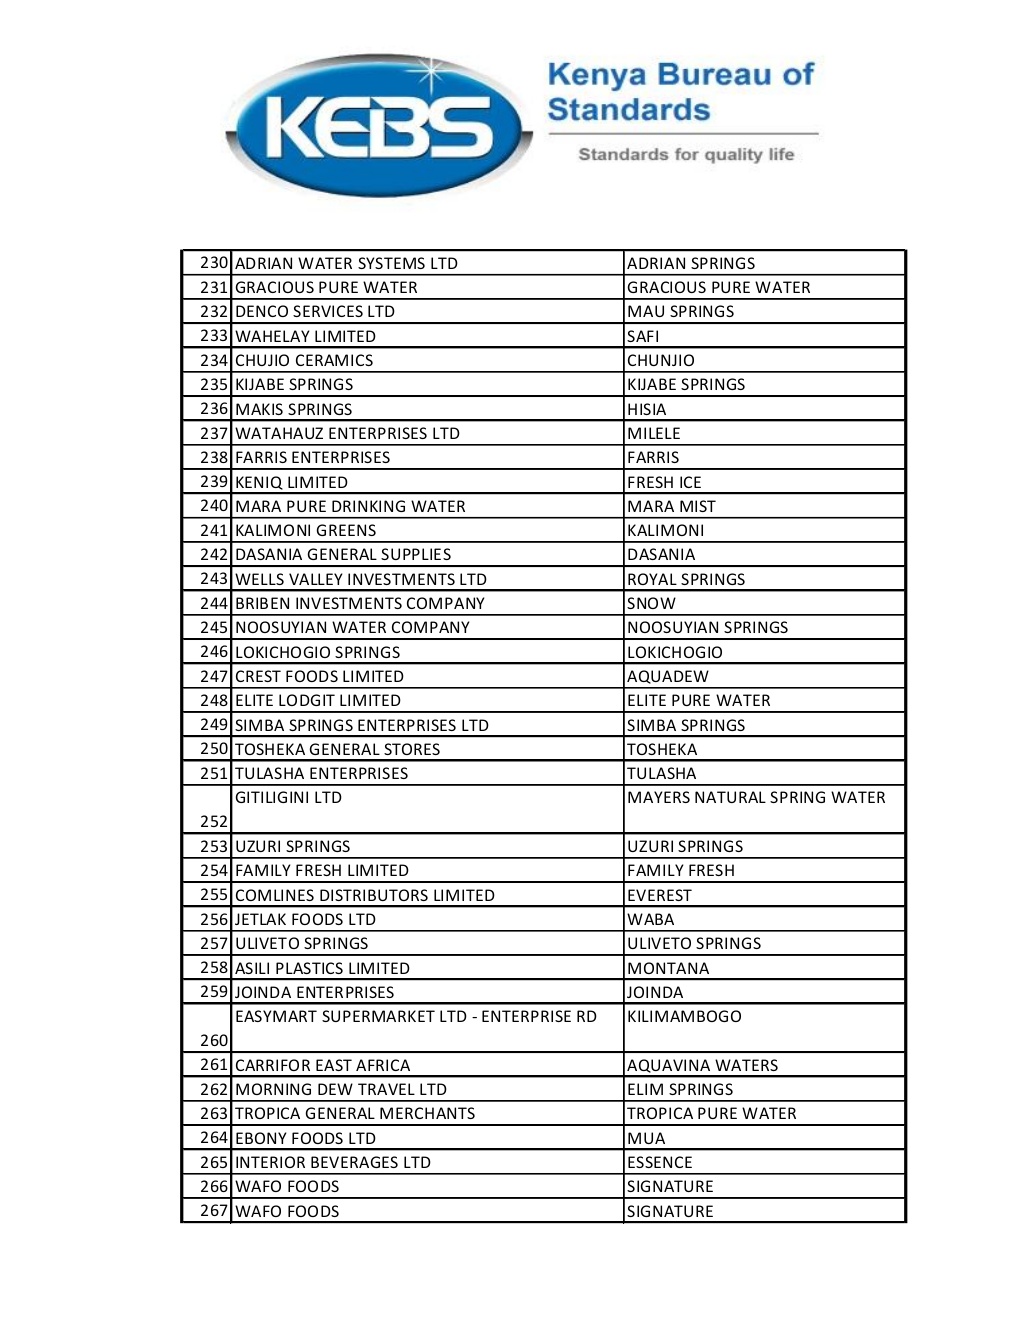 list-of-368-water-brands-banned-by-kebs-7-1024